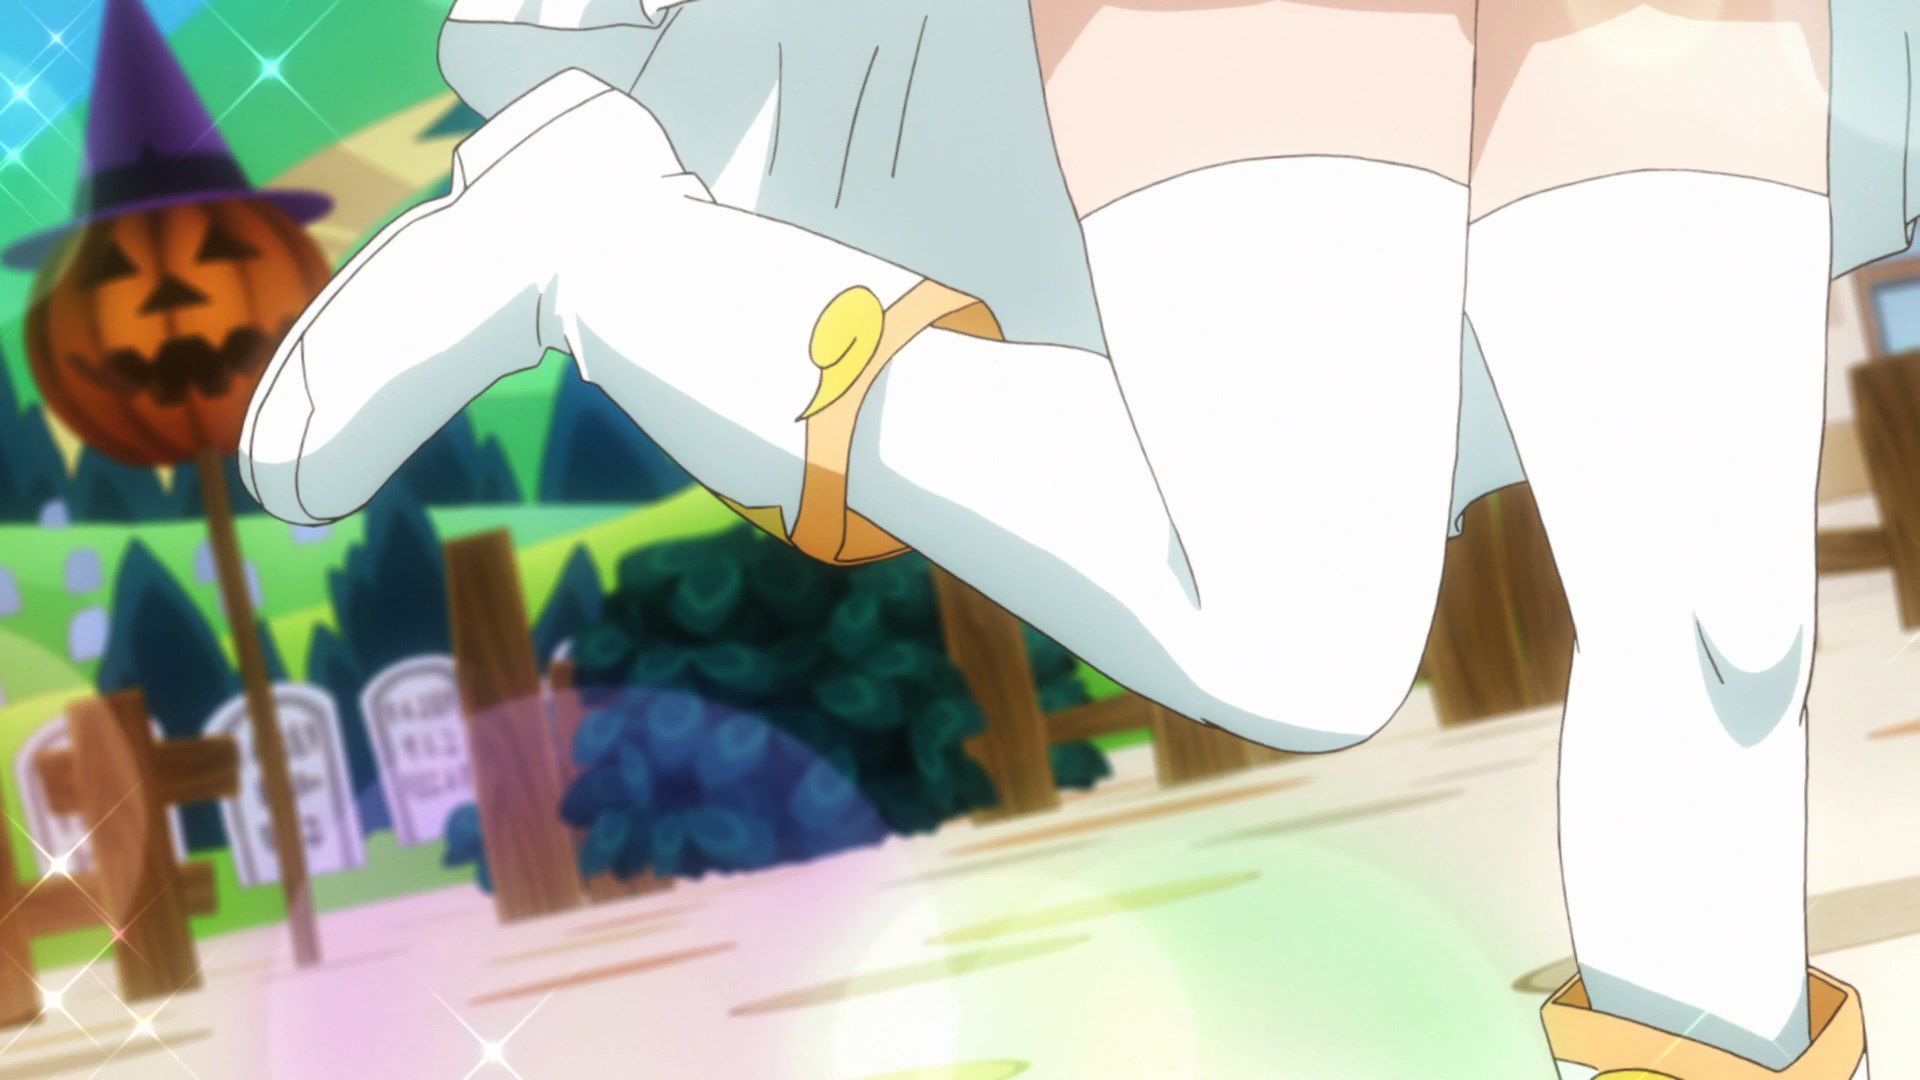 [God images] "love live! ' Μm ' PV's leg is too erotic everyone wakes up to a leg fetish of wwwww 67